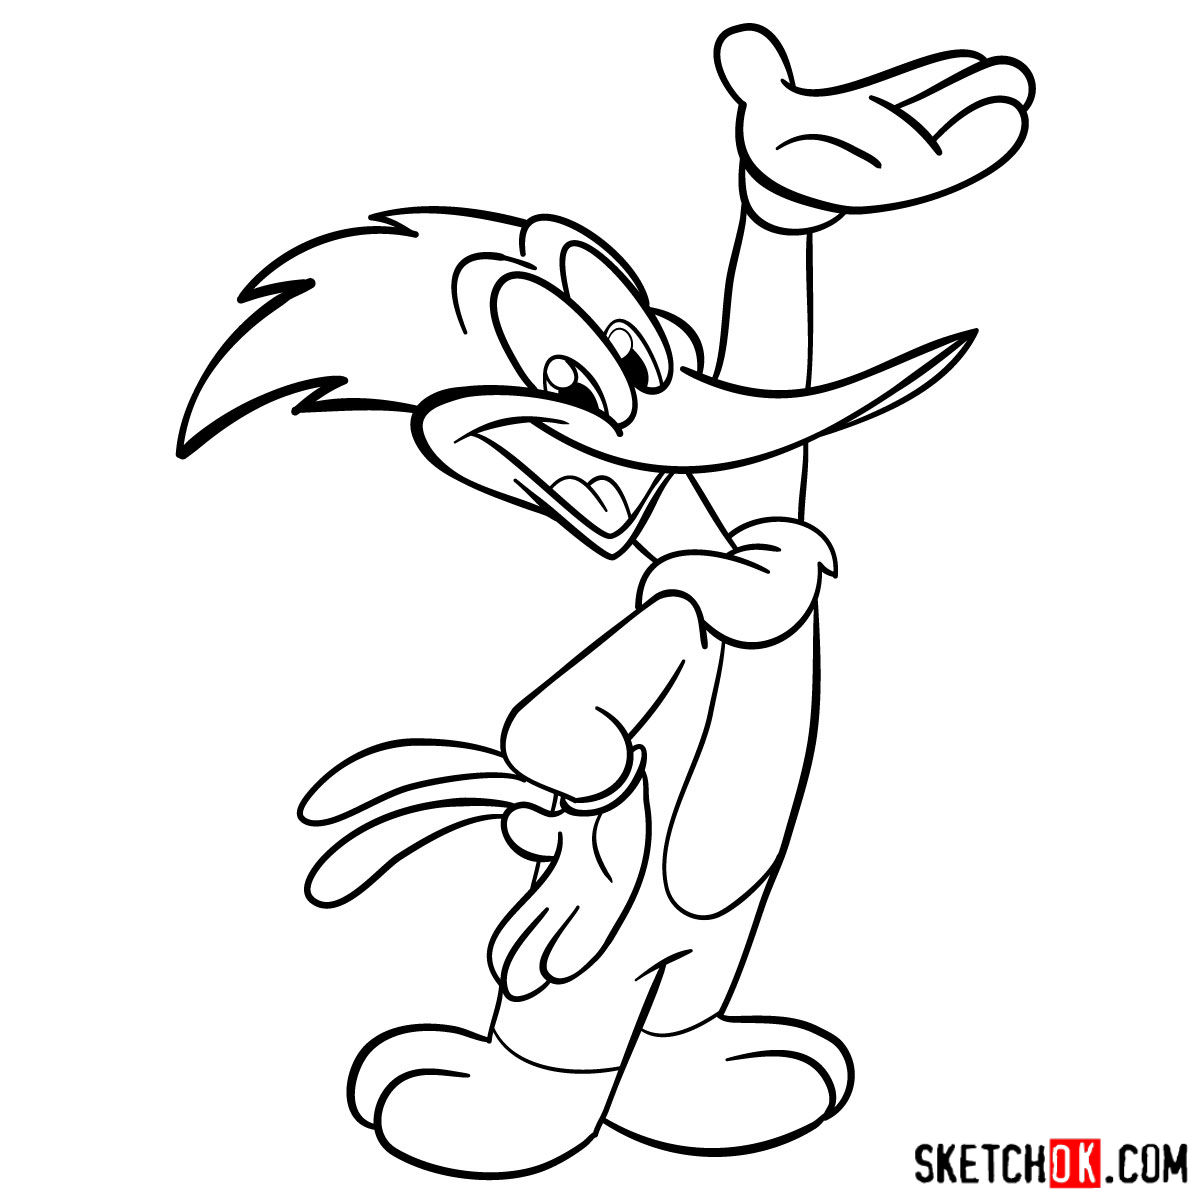 How to draw Woody Woodpecker - step 11